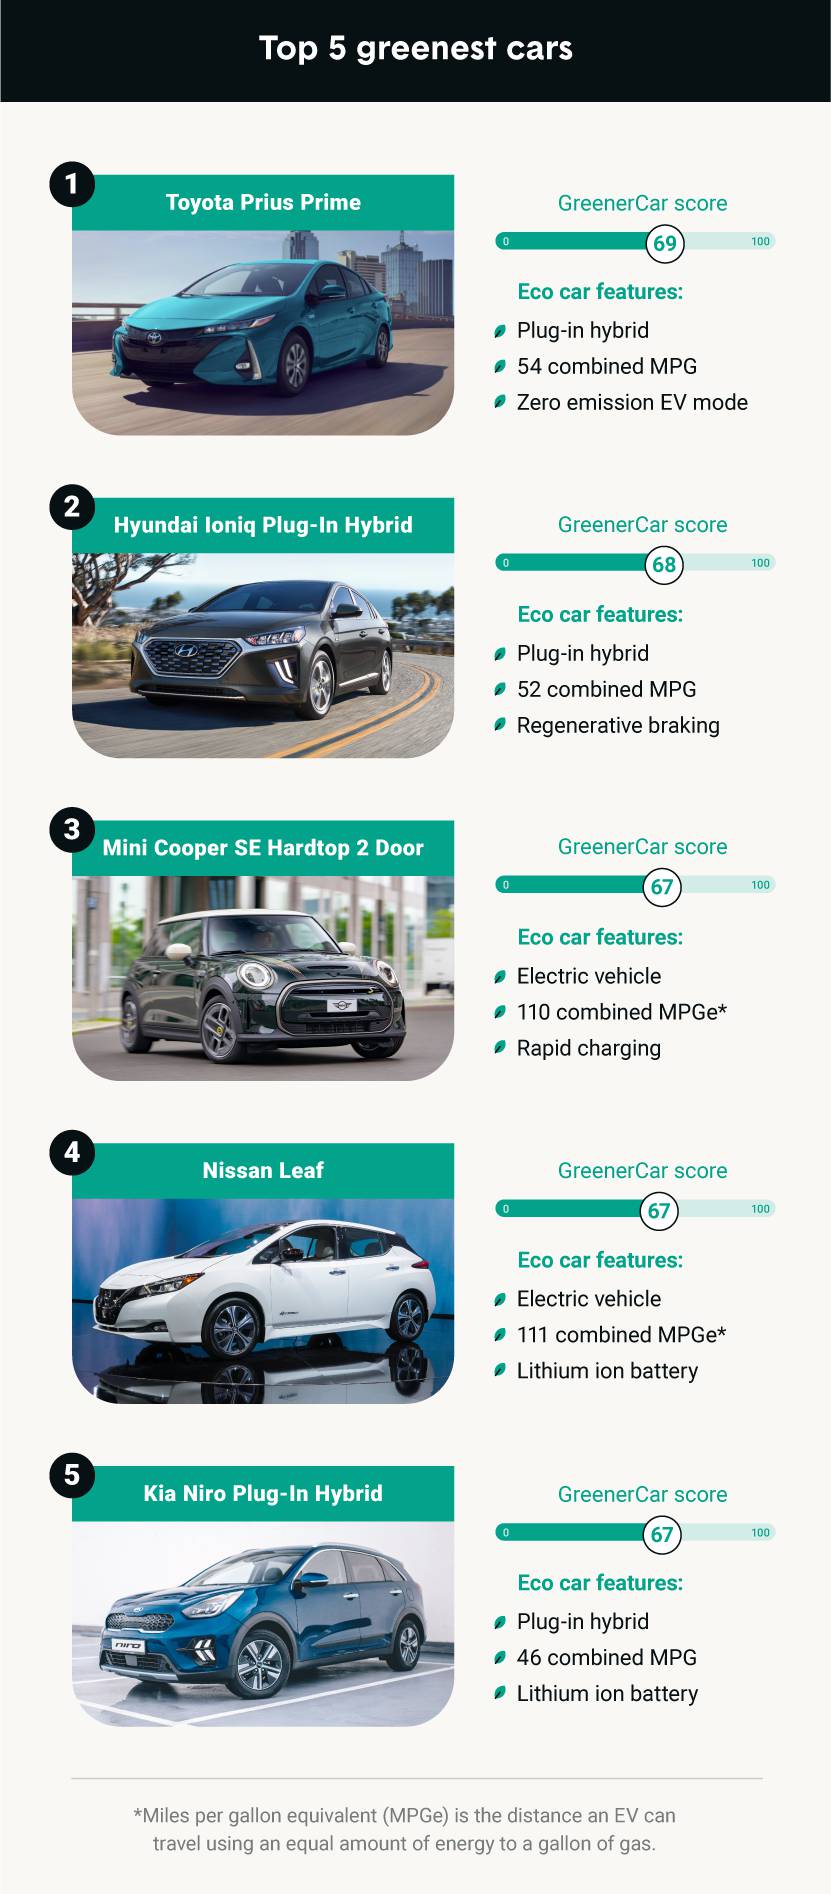 23 of the most ecofriendly cars of 2022